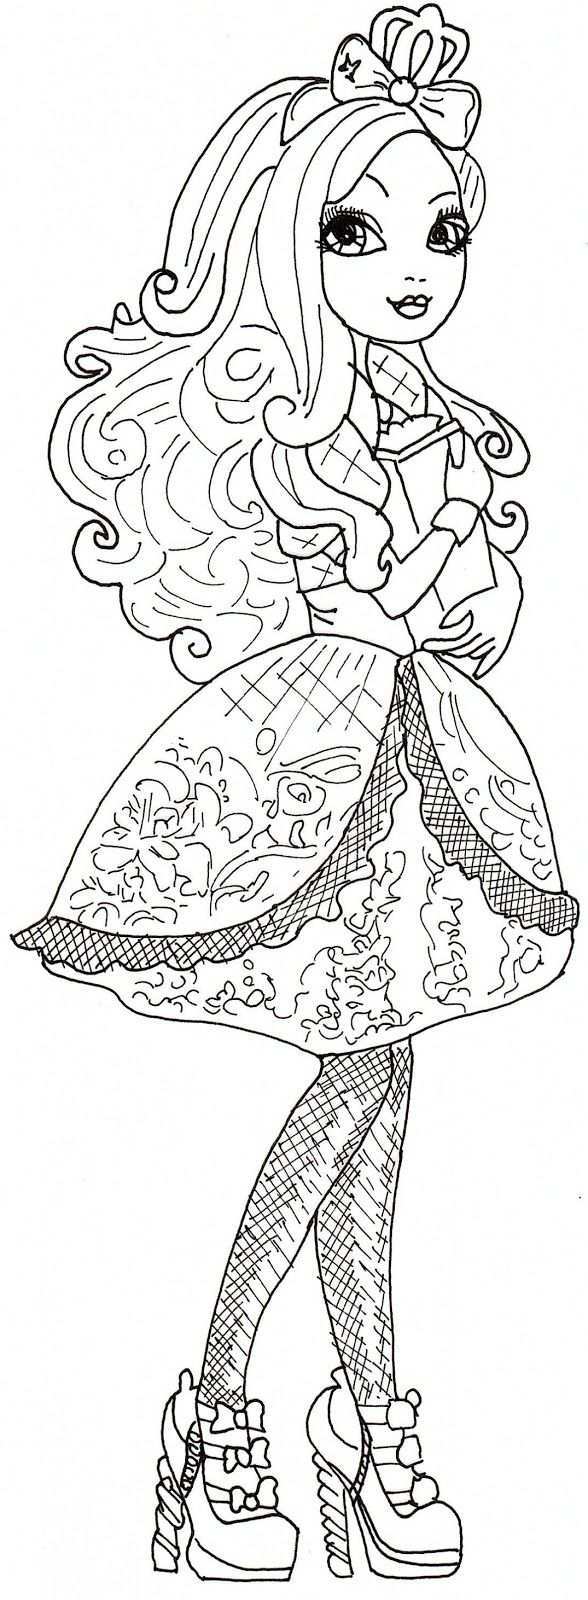 Apple White Ever After High Coloring Sheet Coloring Pages Coloring Pages For Girls Co